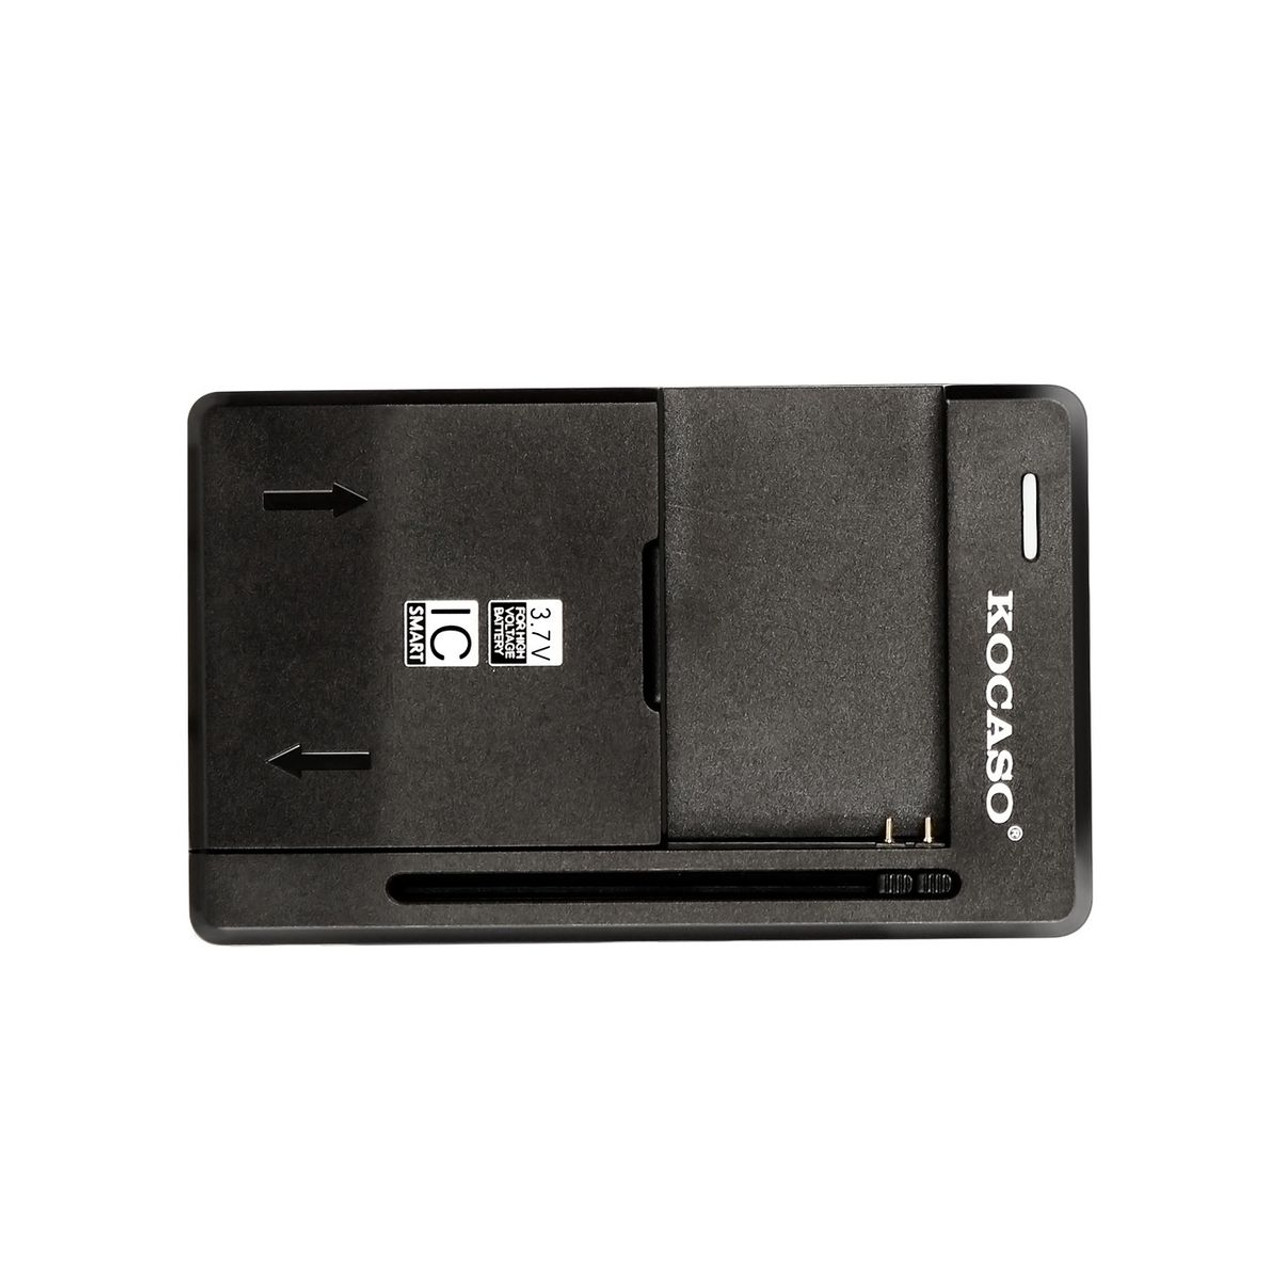 Kocaso® 3.7V Camera/Android Phone Battery Charger product image